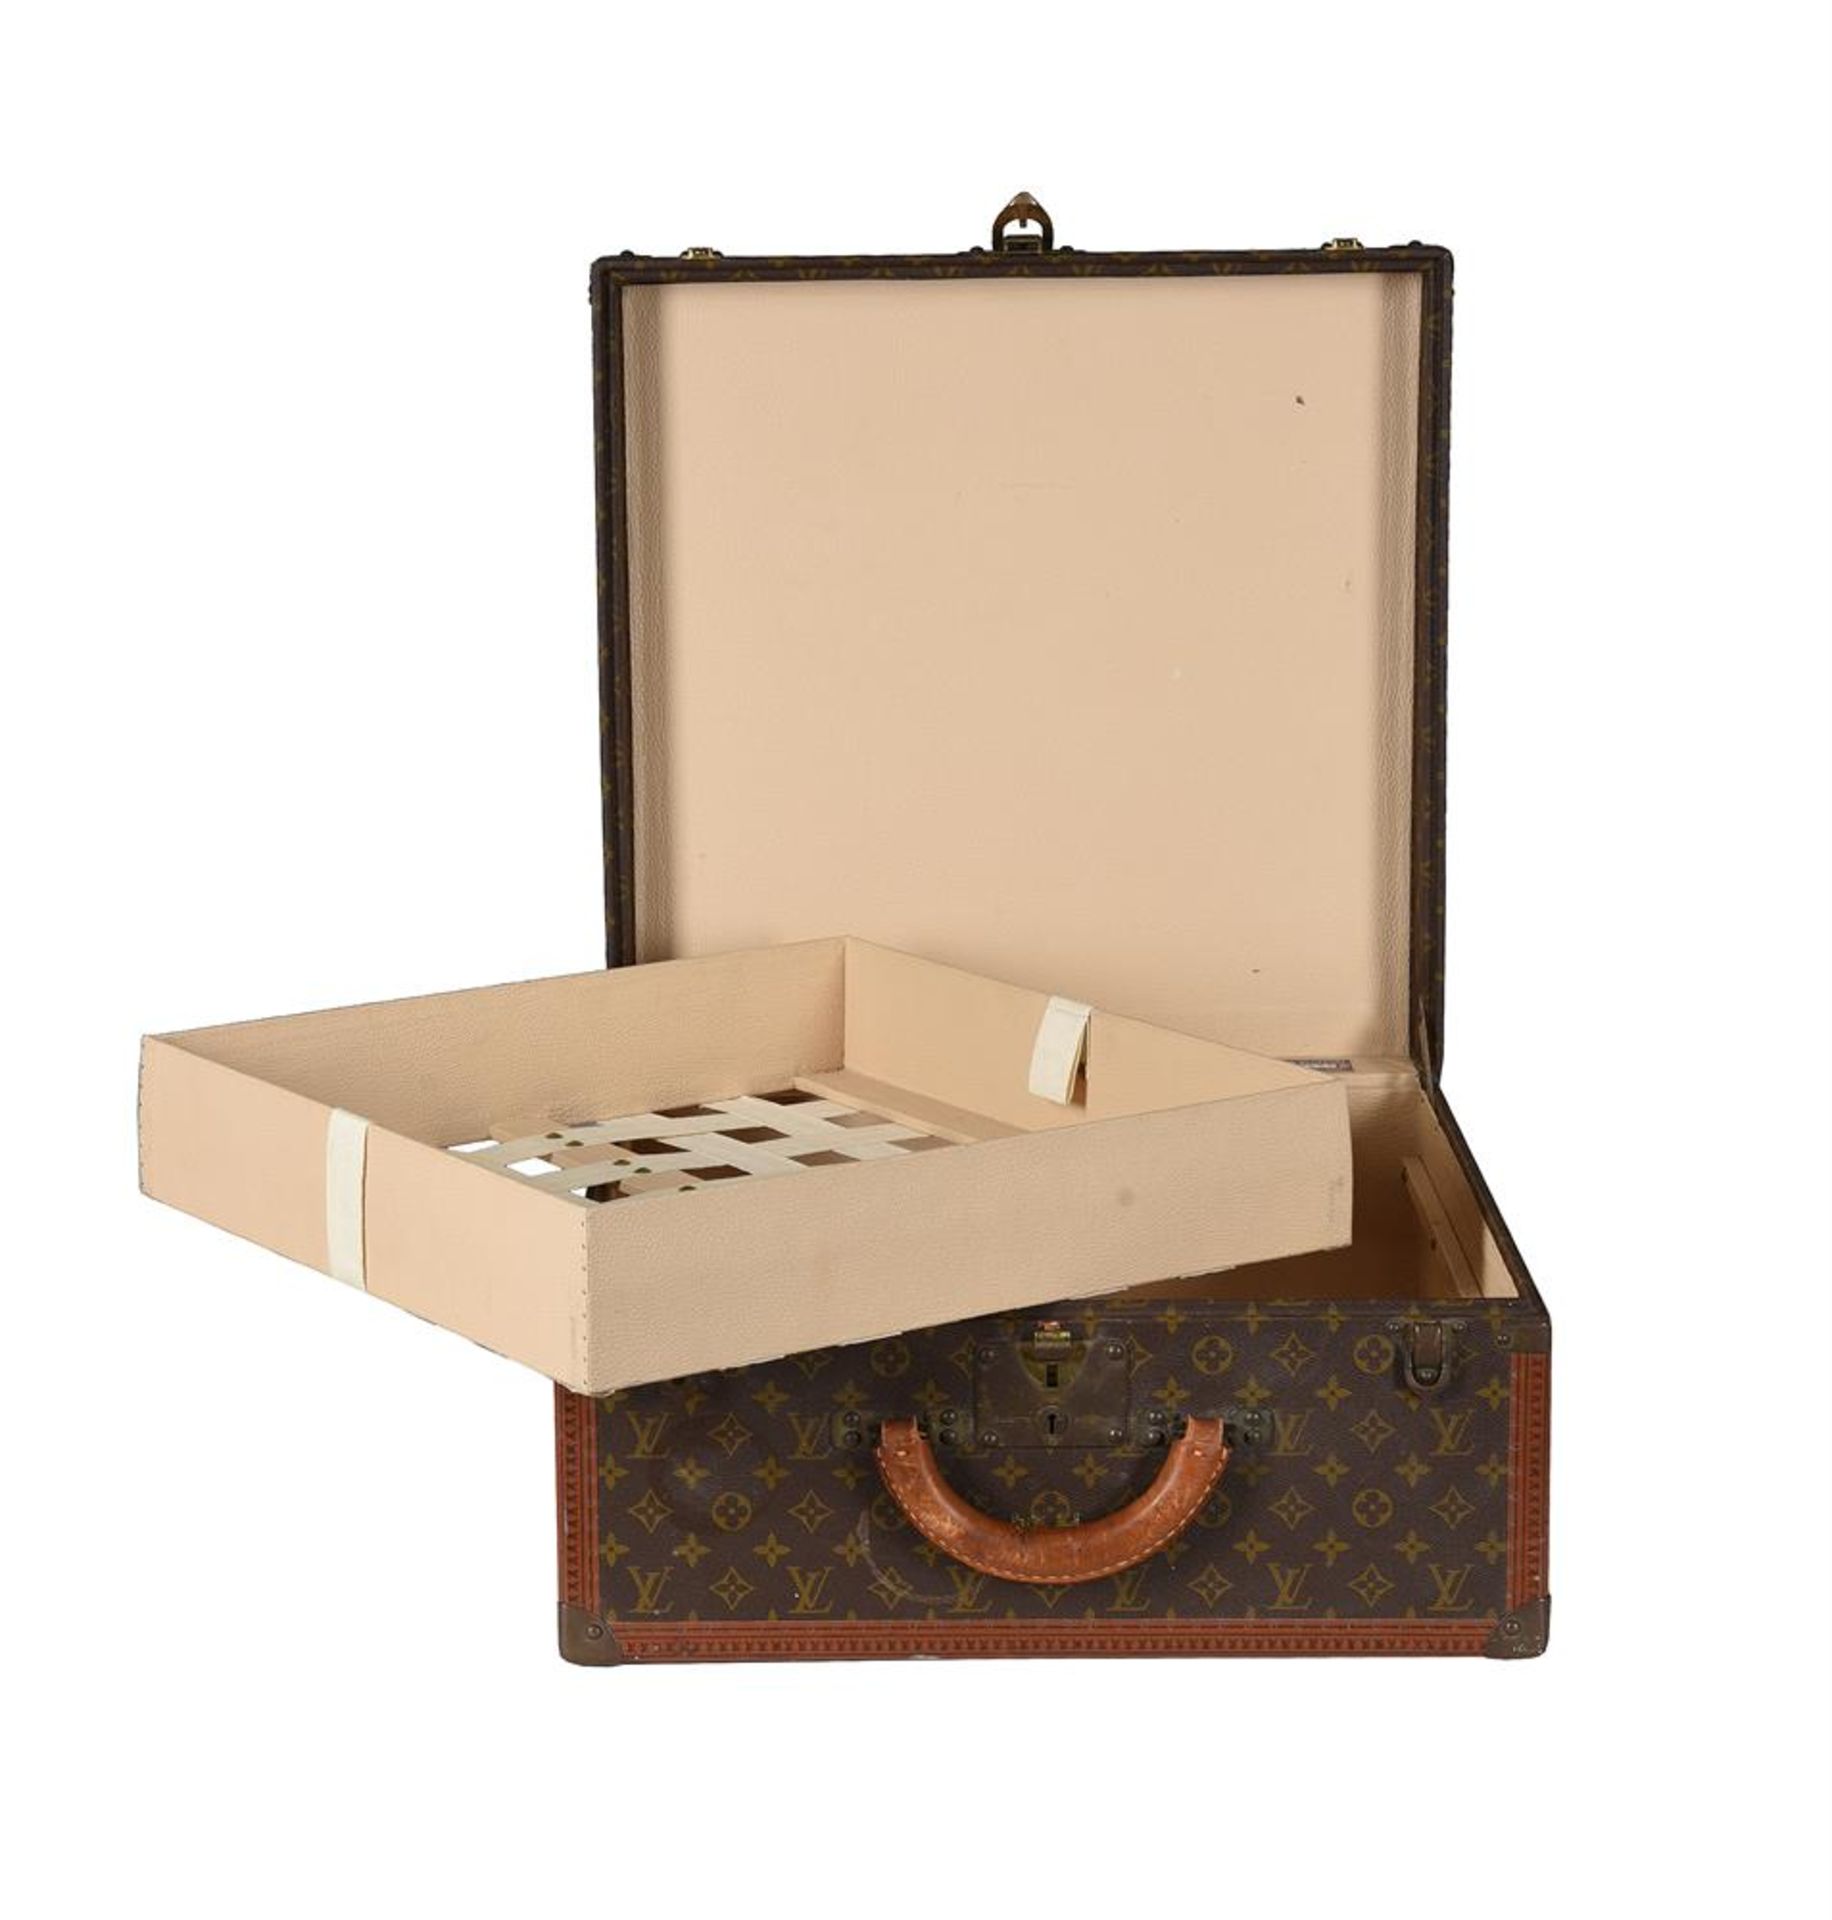 LOUIS VUITTON, A MONOGRAMMED COATED CANVAS HARD TRAVELLING CASE - Image 5 of 6